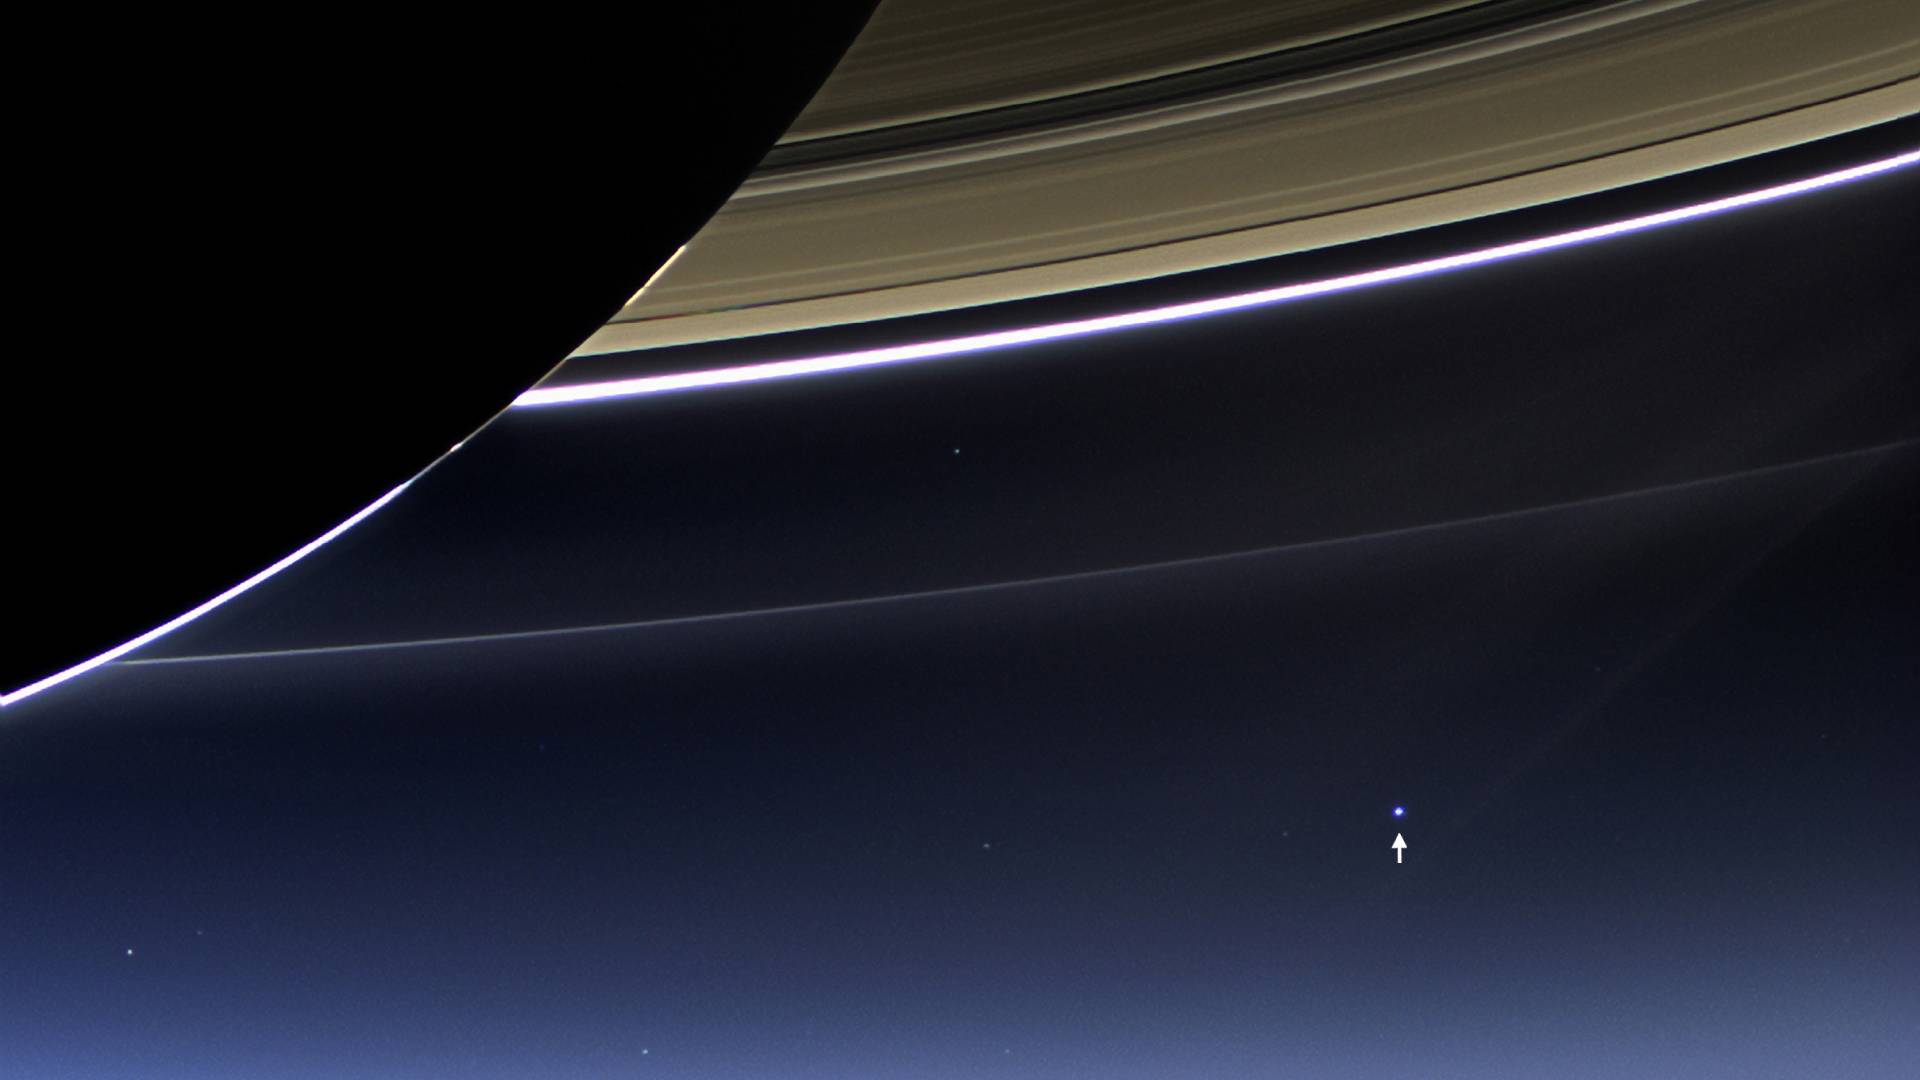 In this rare image taken on July 19, 2013, the wide-angle camera on NASA's Cassini spacecraft has captured Saturn's rings and our planet Earth and its moon in the same frame. It is only one footprint in a mosaic of 33 footprints covering the entire Saturn ring system (including Saturn itself). At each footprint, images were taken in different spectral filters for a total of 323 images: some were taken for scientific purposes and some to produce a natural color mosaic. This is the only wide-angle footprint that has the Earth-moon system in it. (Photo by NASA/Handout/Corbis via Getty Images)